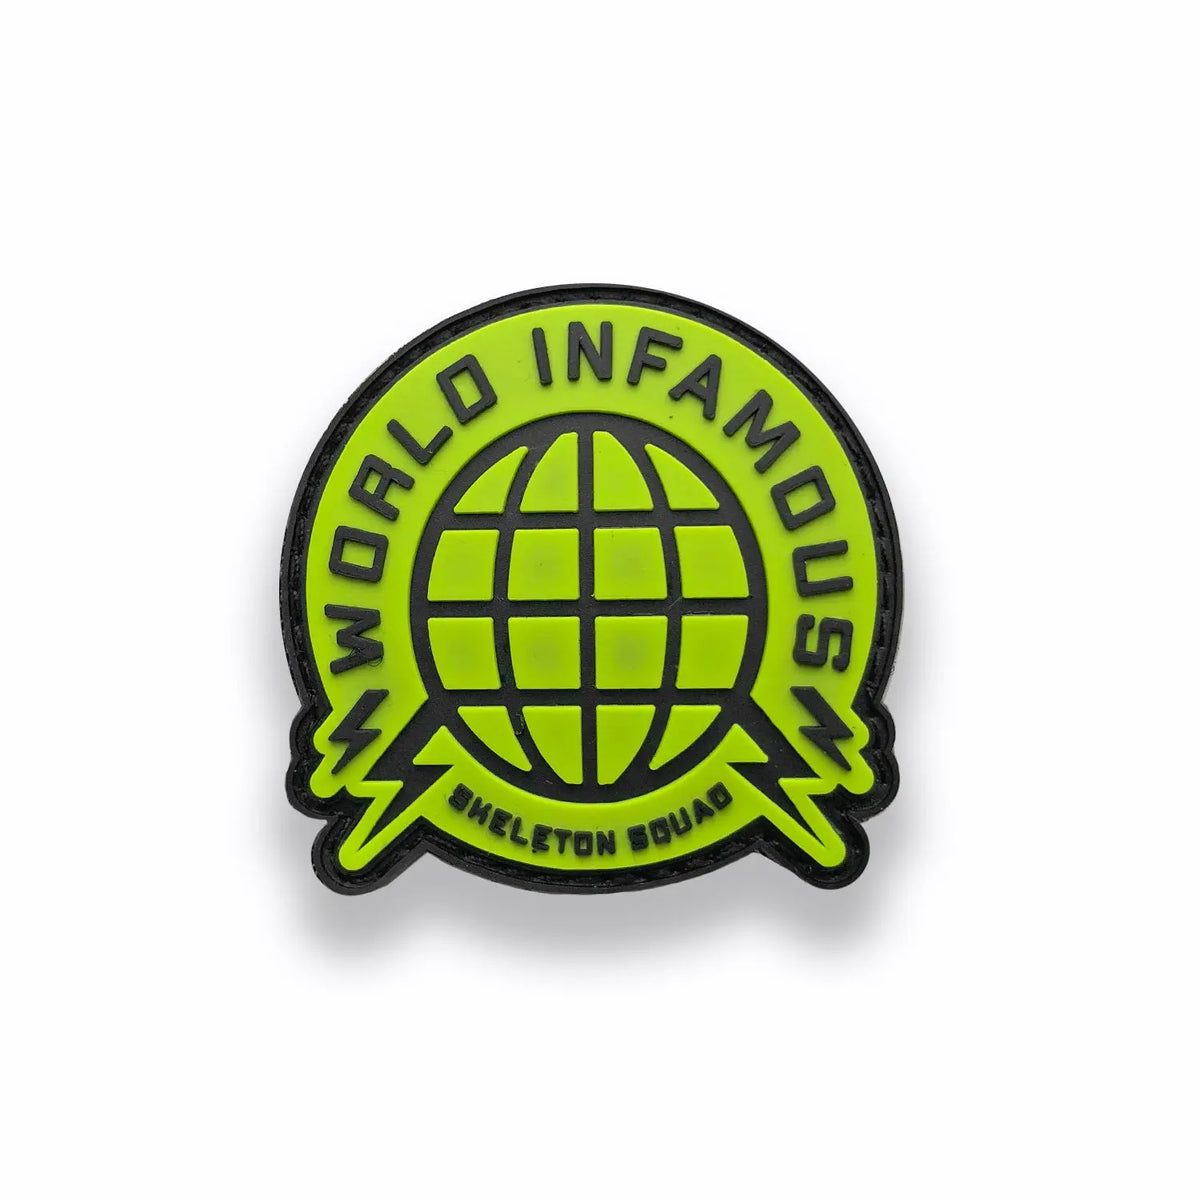 World Infamous Circle Paintball Patch (2x2)